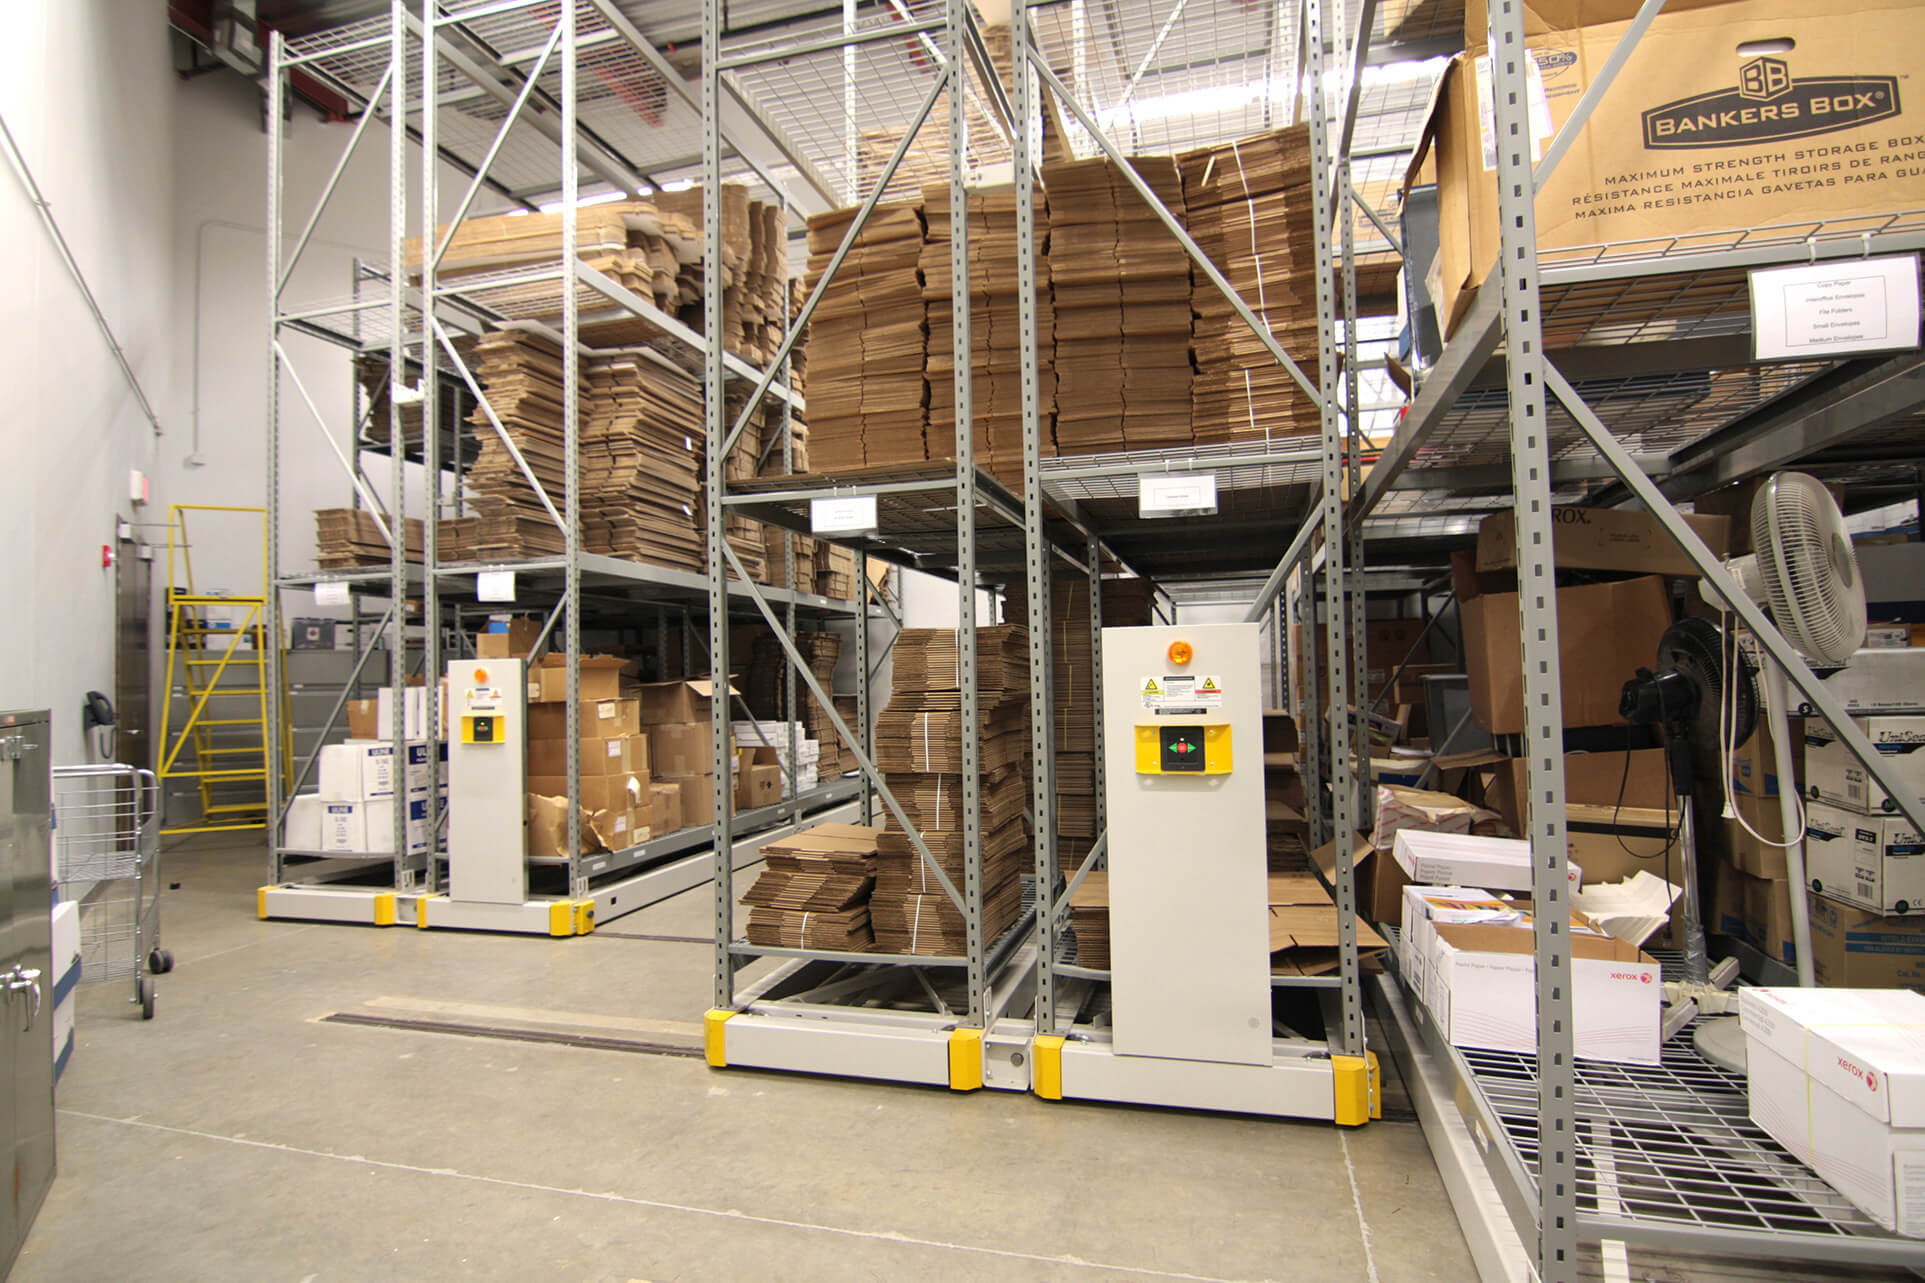 Wide span racking on compact mobile storage system in evidence room